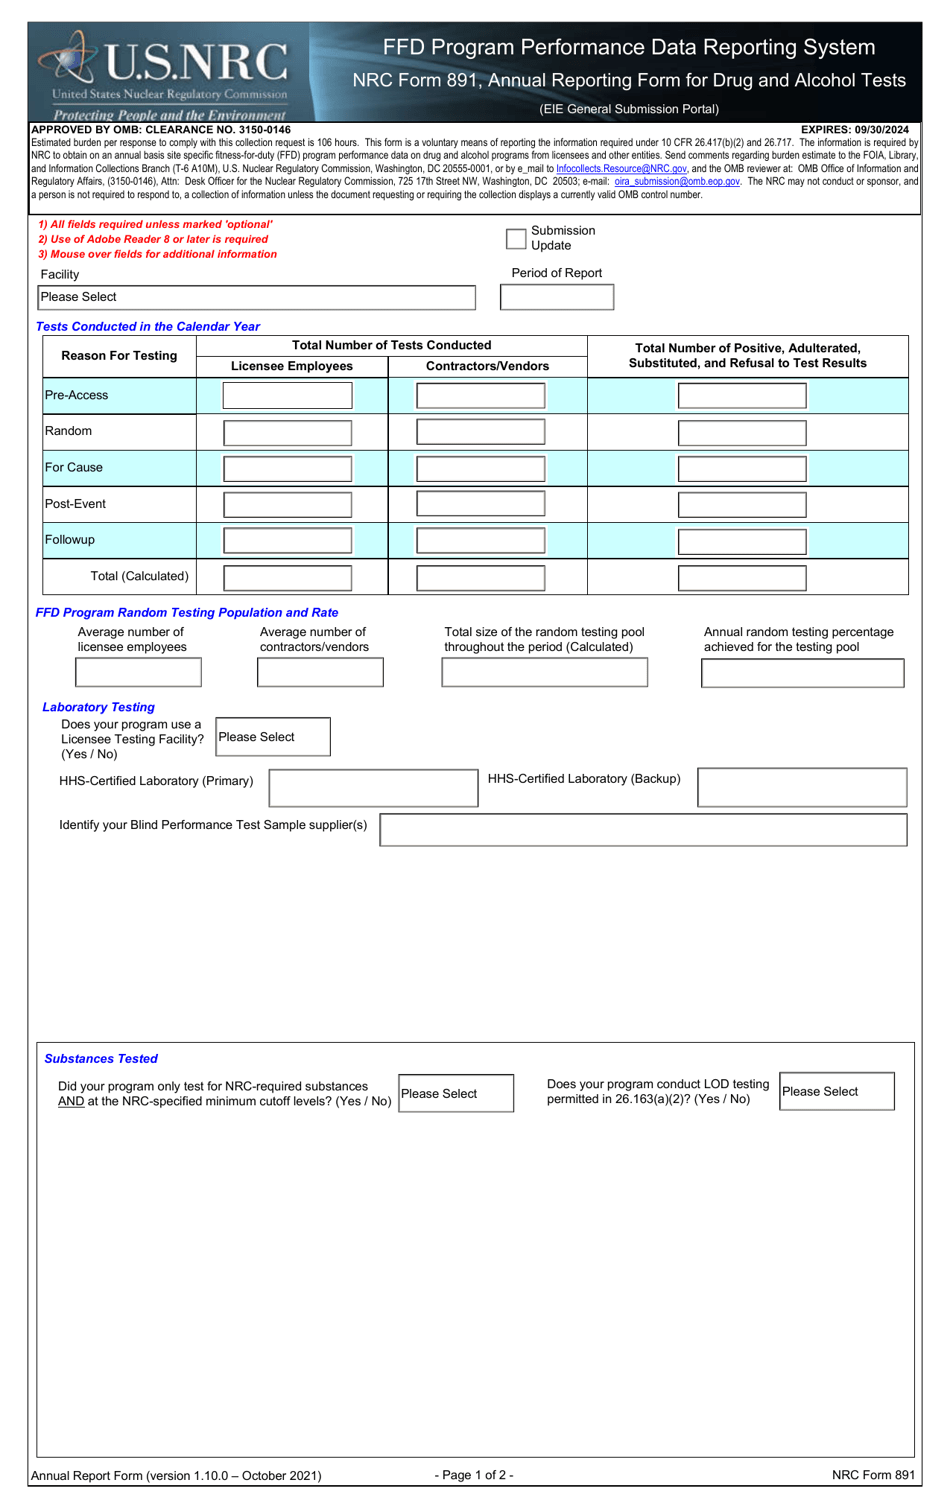 NRC Form 891 Annual Reporting Form for Drug and Alcohol Tests, Page 1